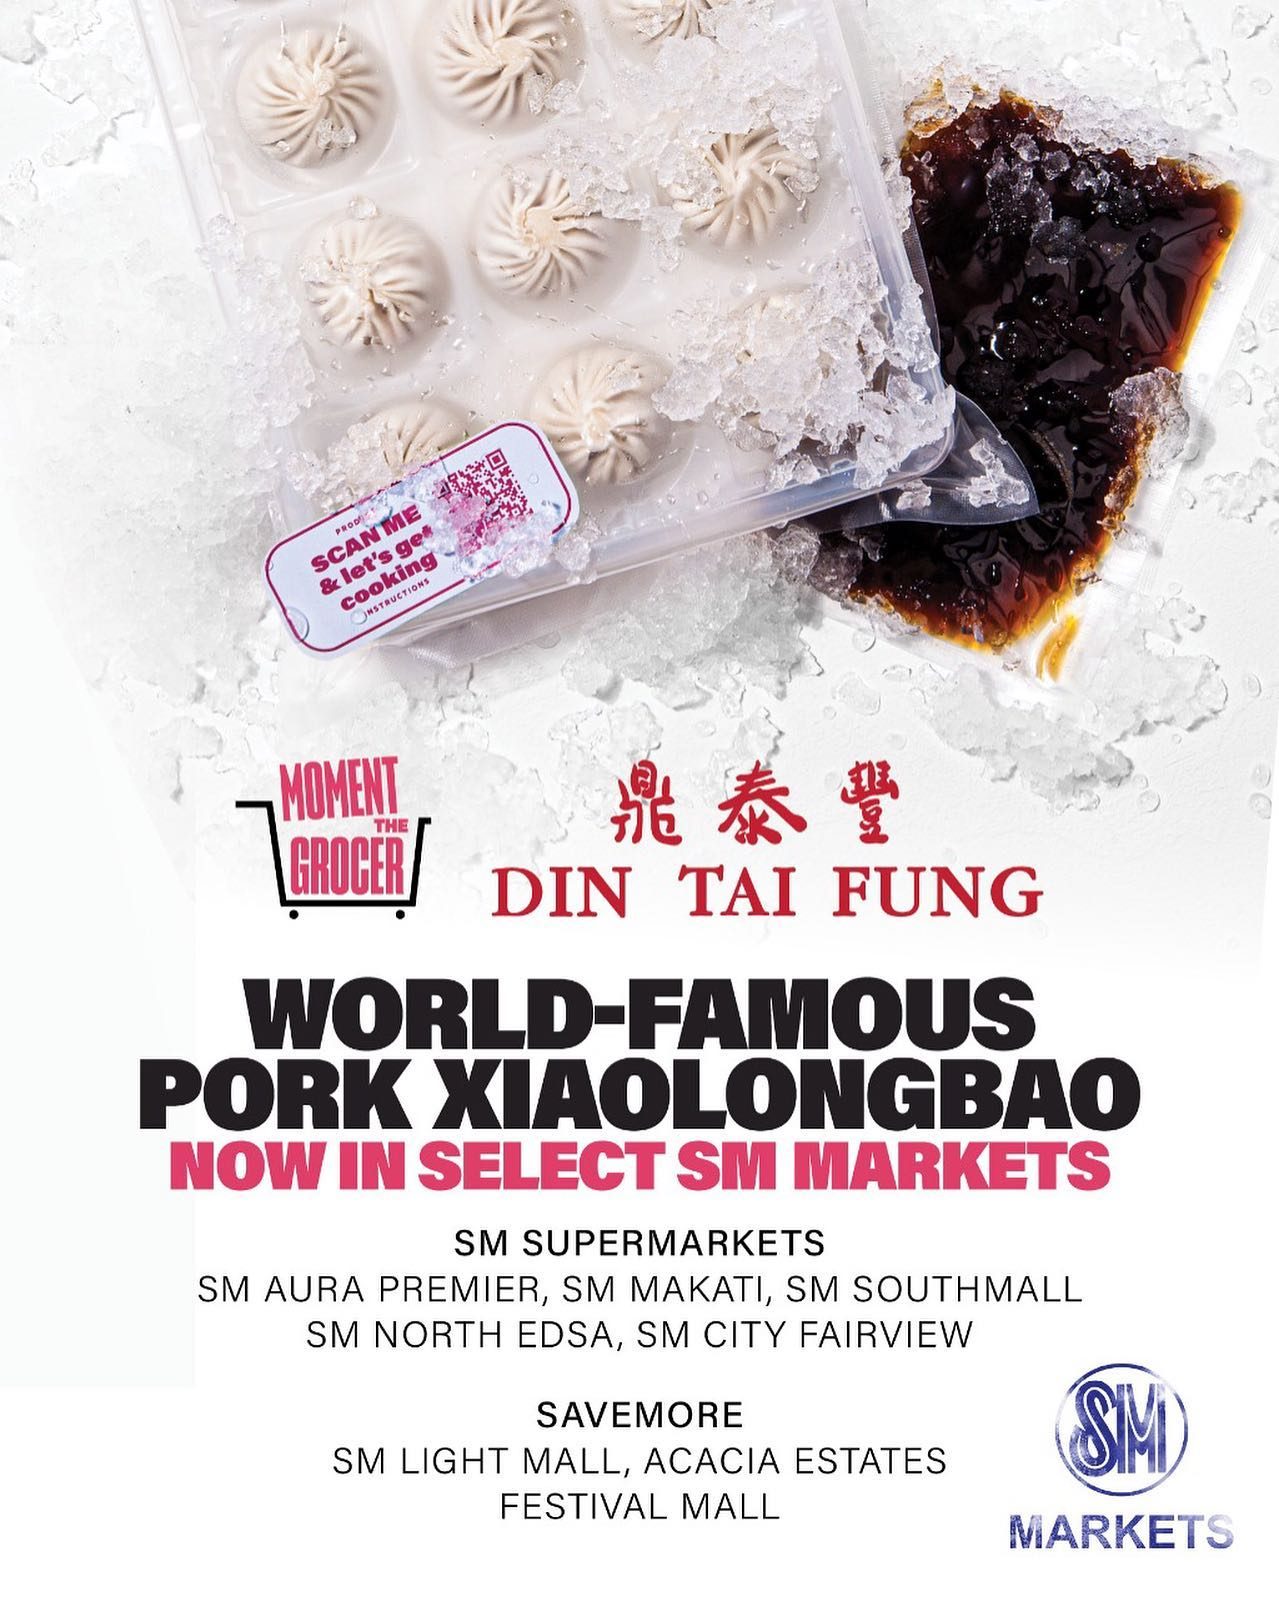 Din Tai Fung’s xiaolongbao now available in supermarkets